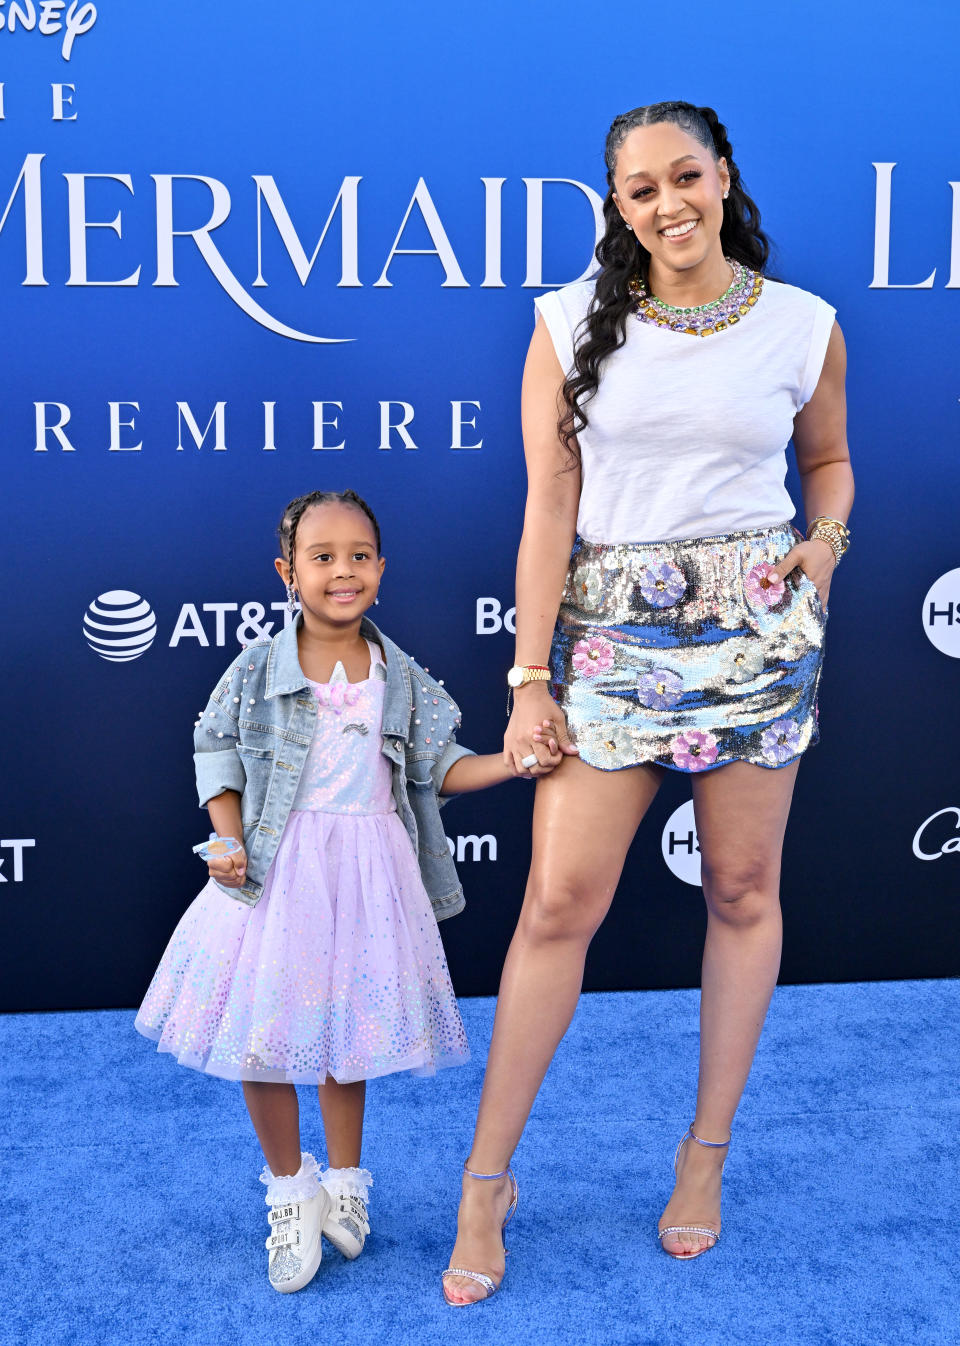 HOLLYWOOD, CALIFORNIA - MAY 08: Cairo Tiahna Hardrict and Tia Mowry attend the World Premiere of Disney's "The Little Mermaid" on May 08, 2023 in Hollywood, California. (Photo by Axelle/Bauer-Griffin/FilmMagic)